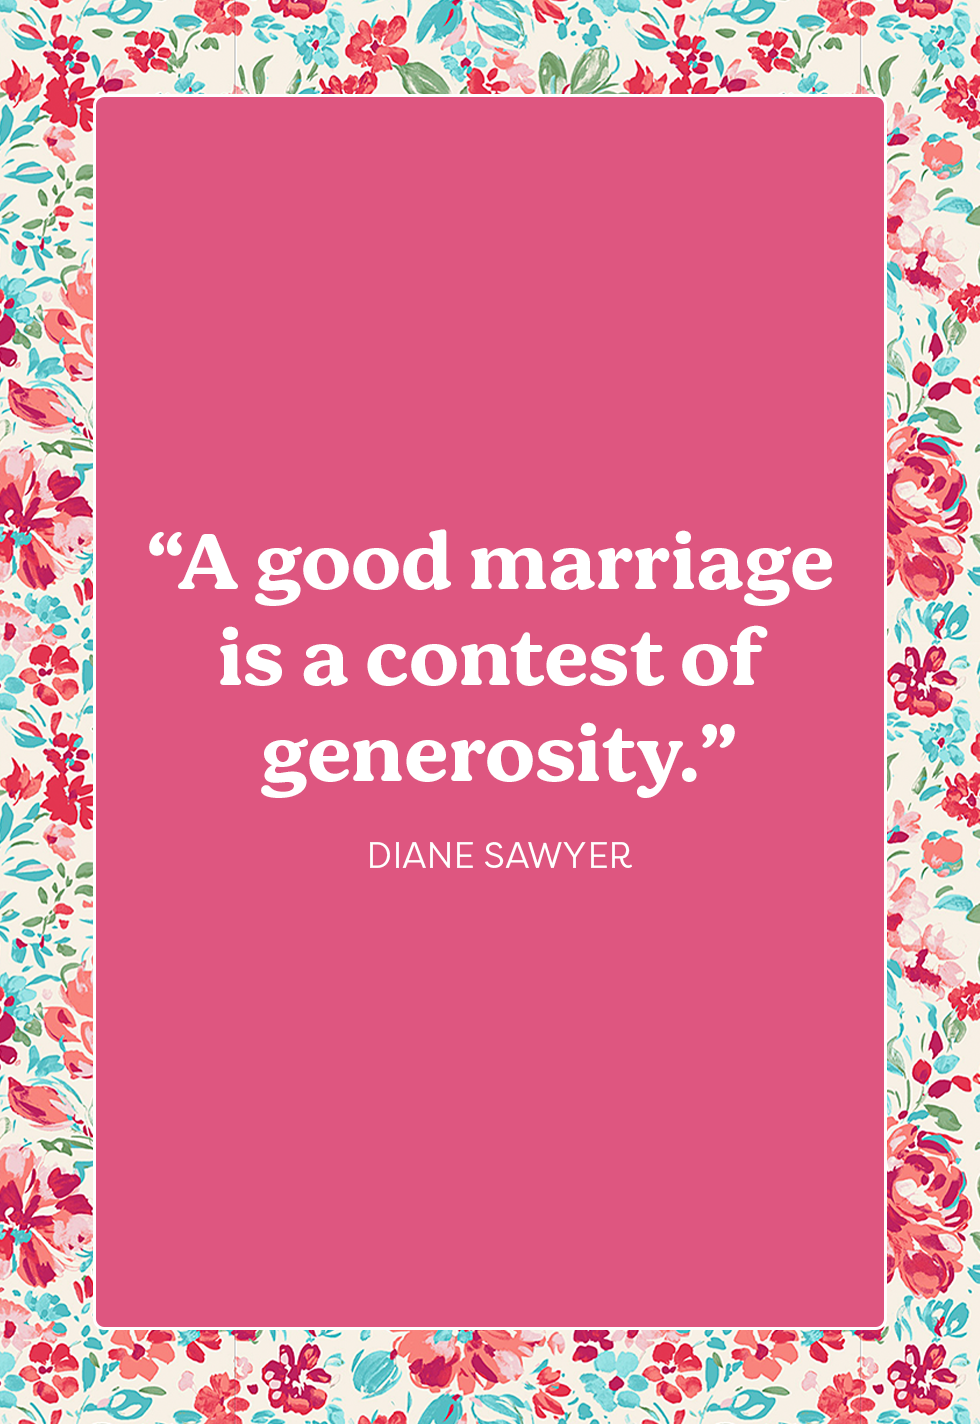 25 Marriage Quotes - Best Quotes and Sayings About Marriage